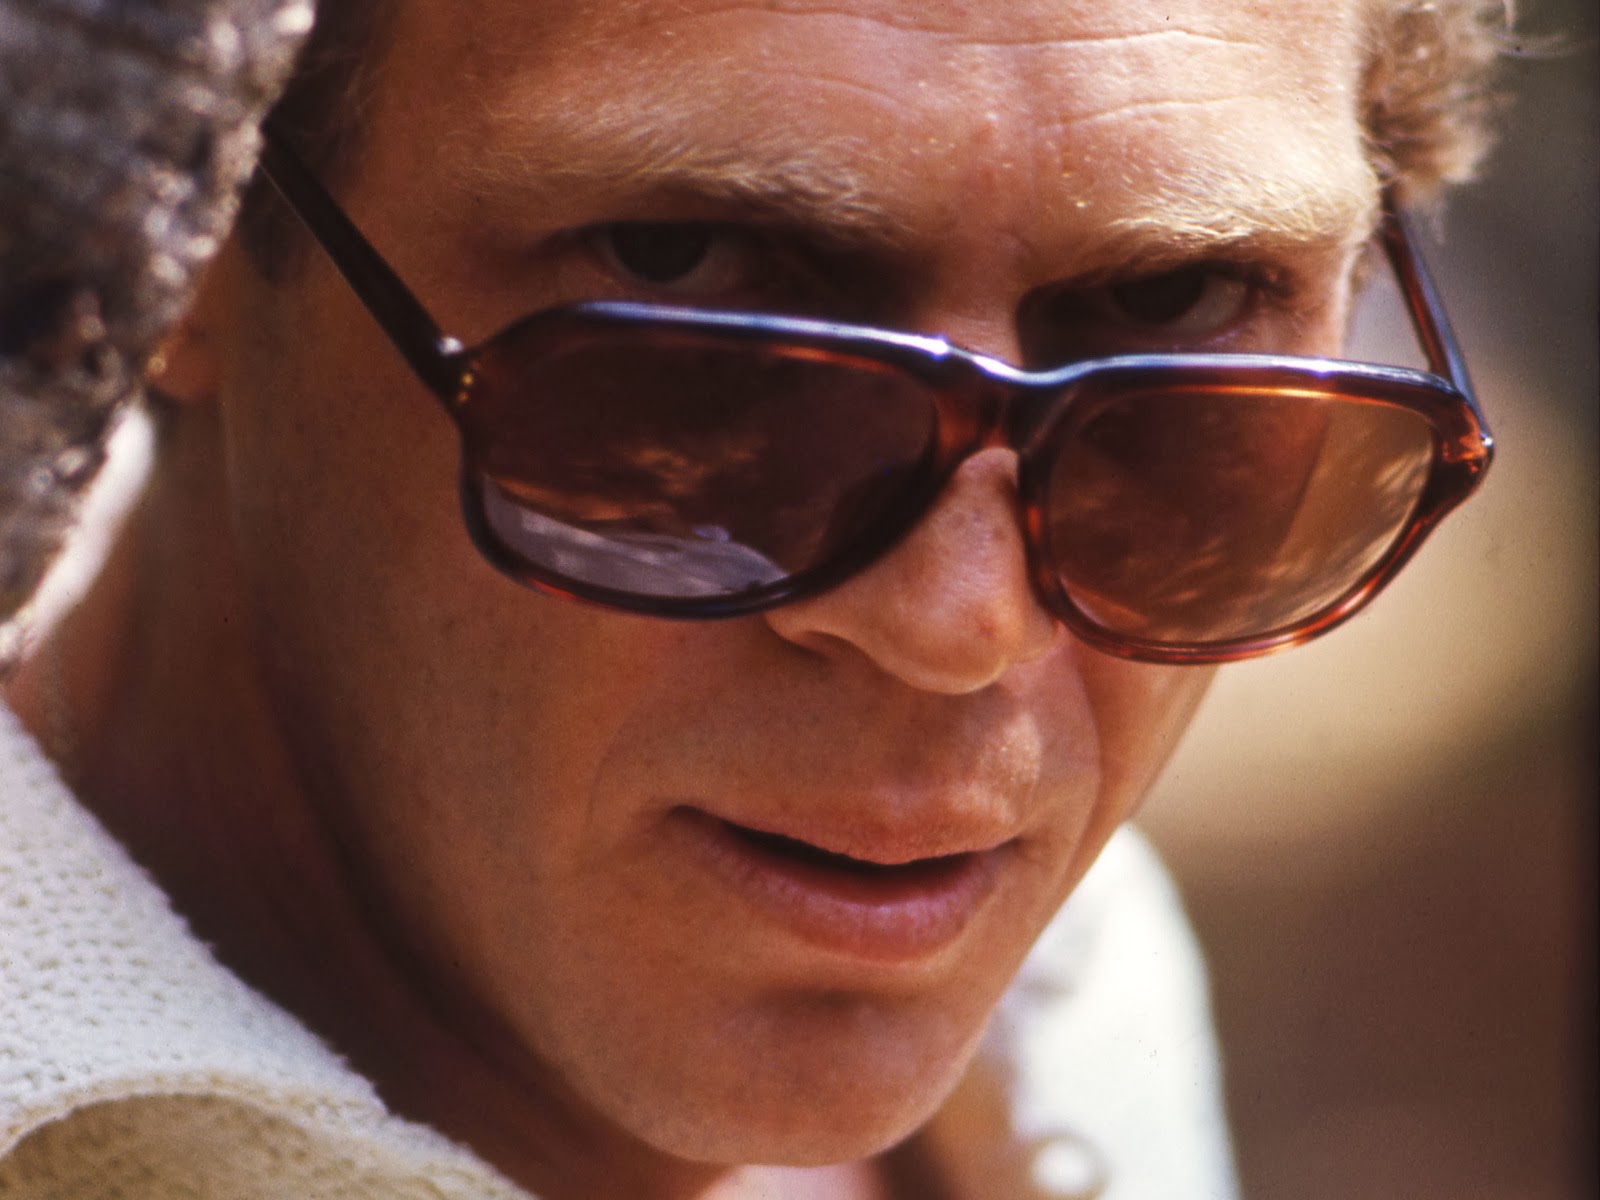 Steve McQueen sunglasses were one of his defining accessories